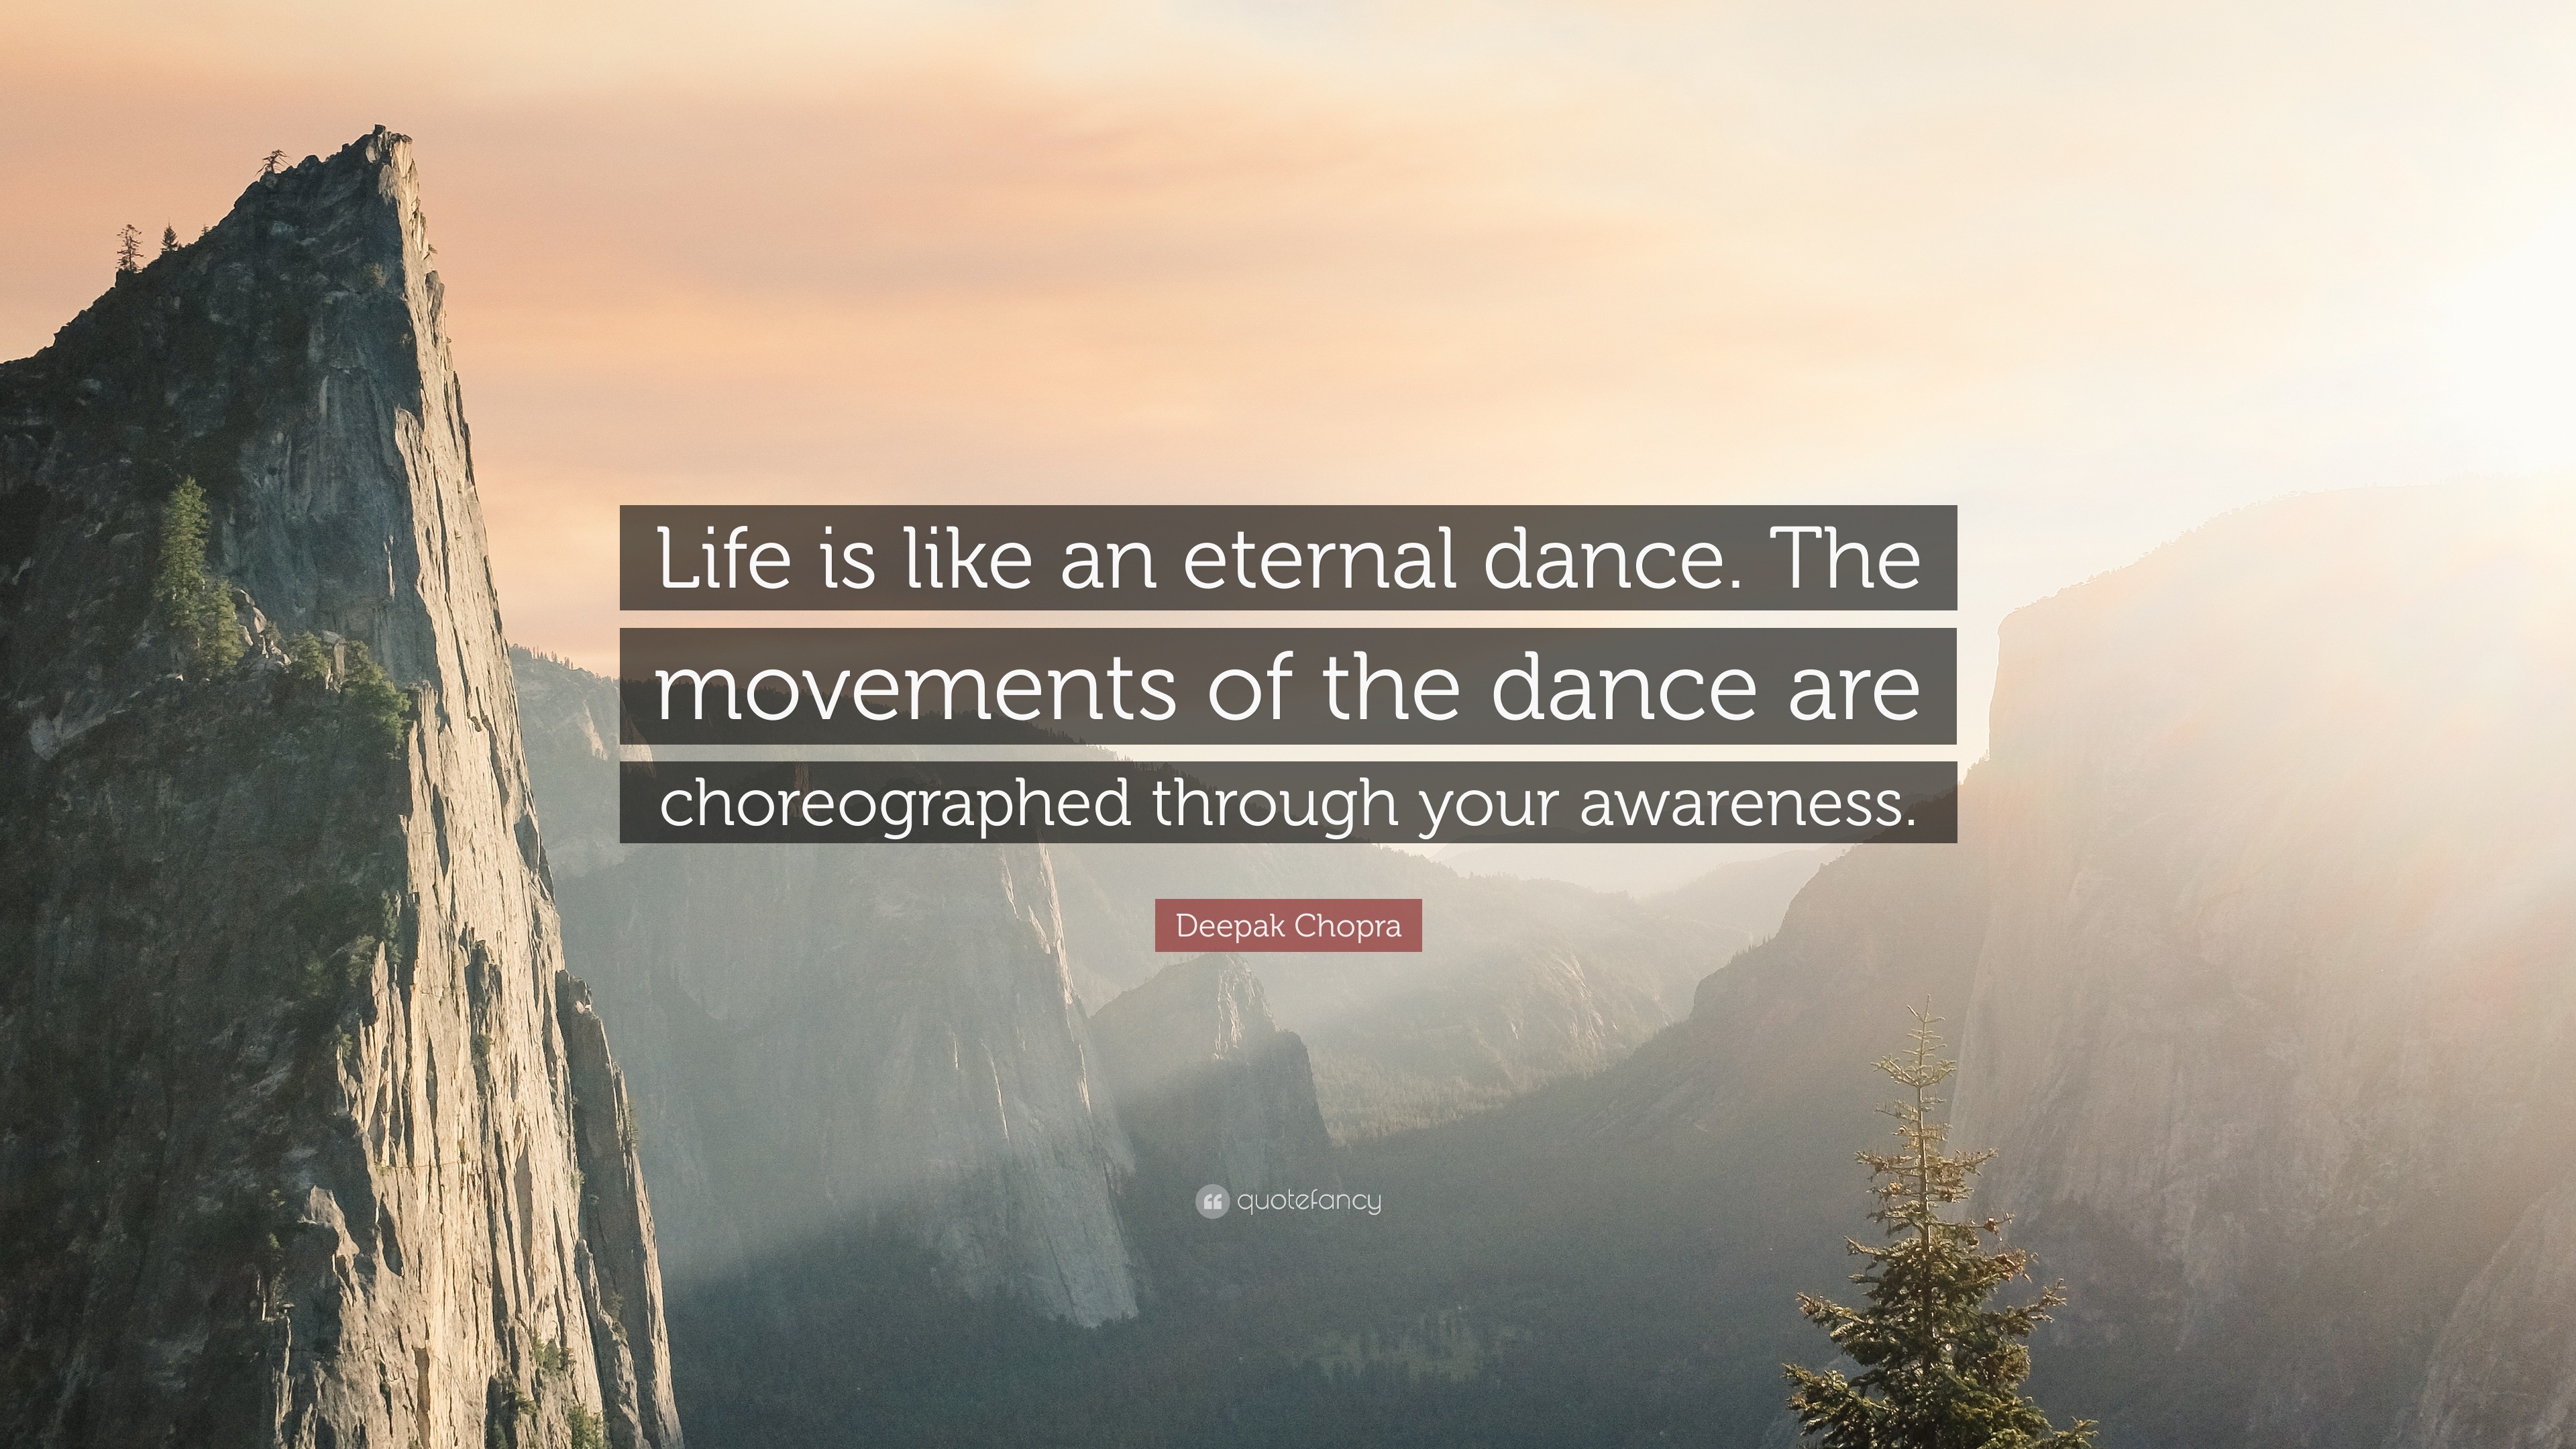 Deepak Chopra Quote “Life is like an eternal dance The movements of the